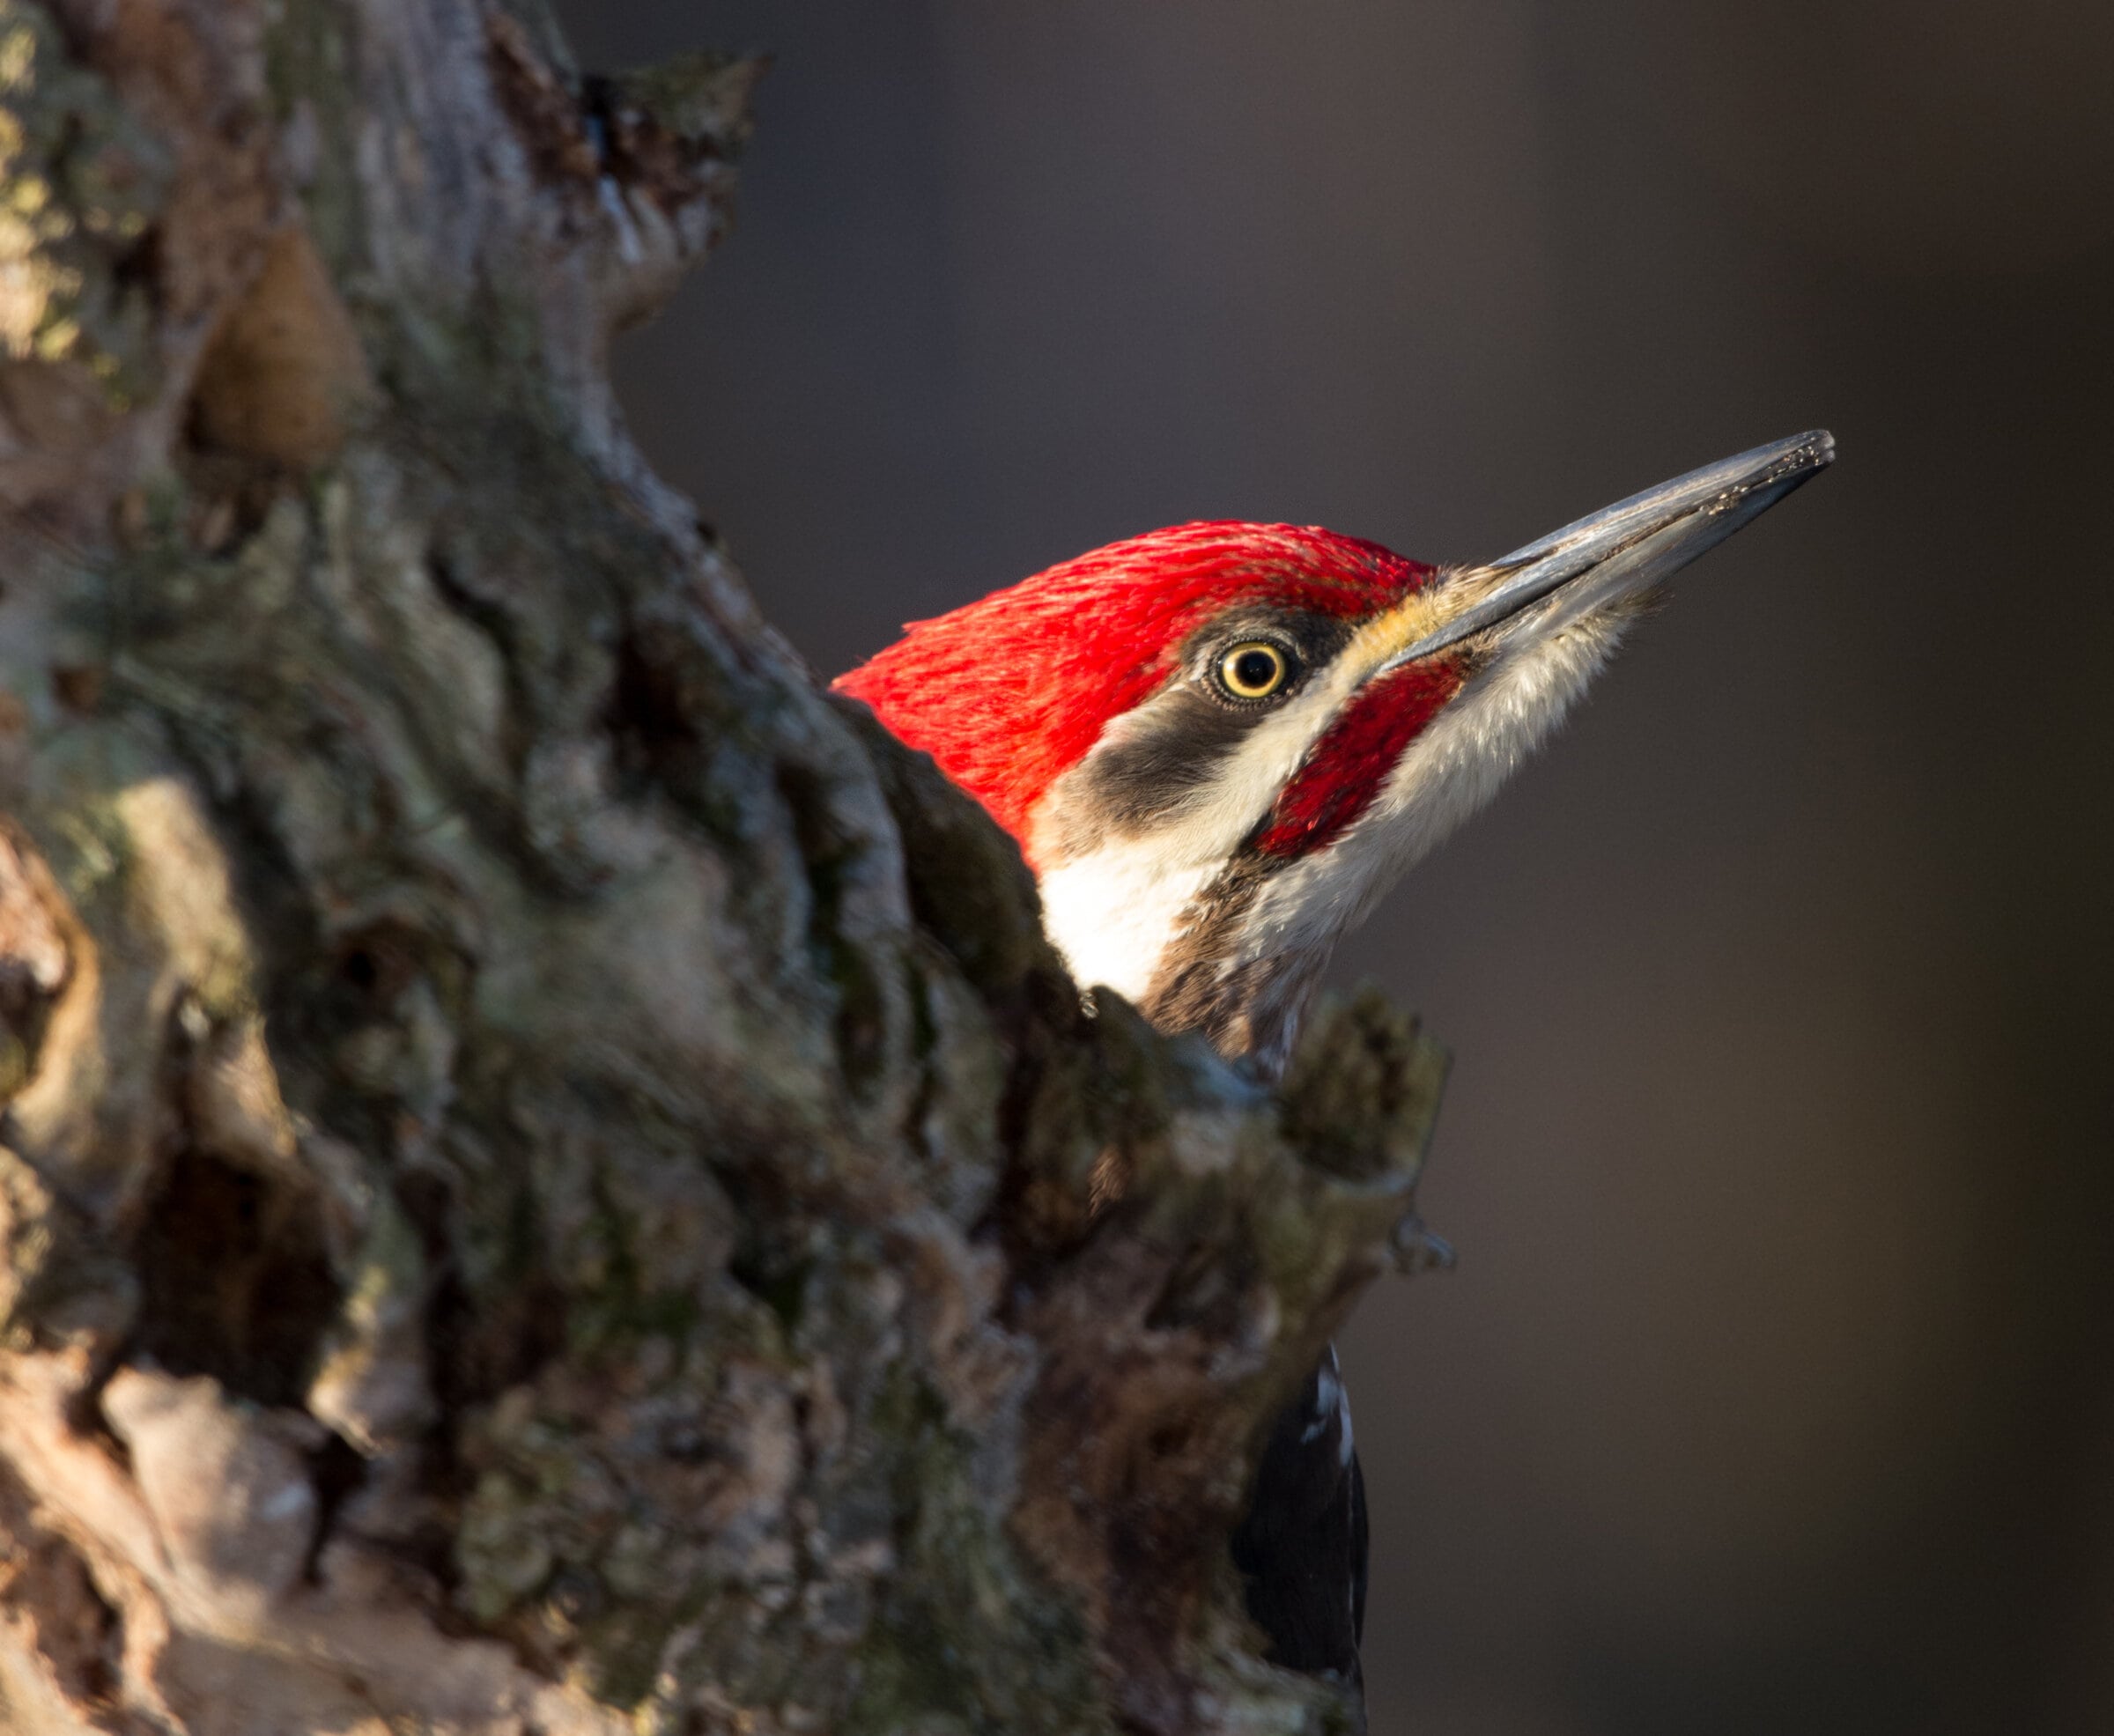 A large woodpecker with a red crest and large beak shows his profile against a dark tree trunk